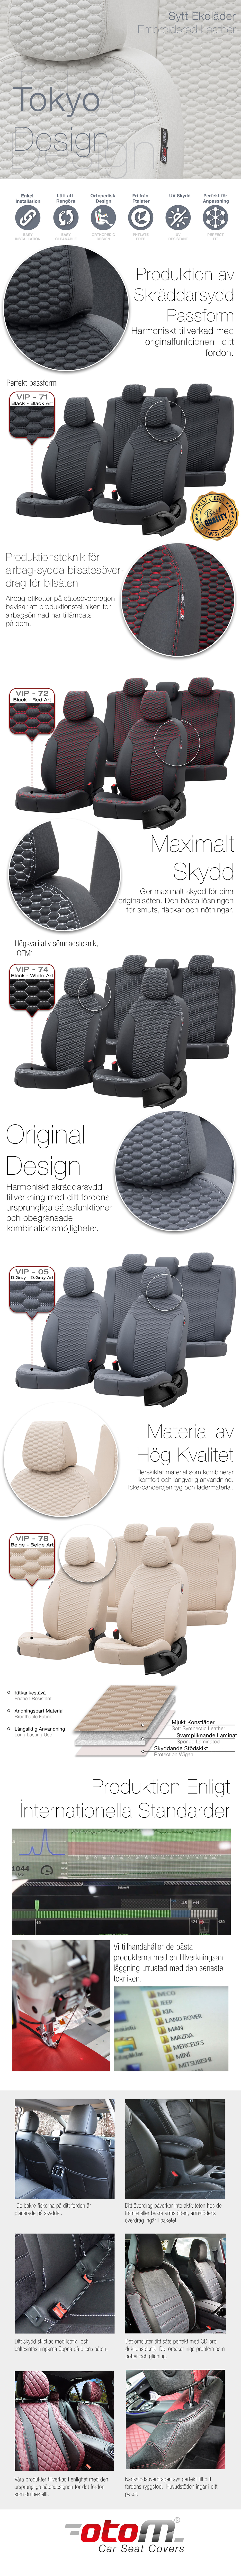 Tokyo design seat covers